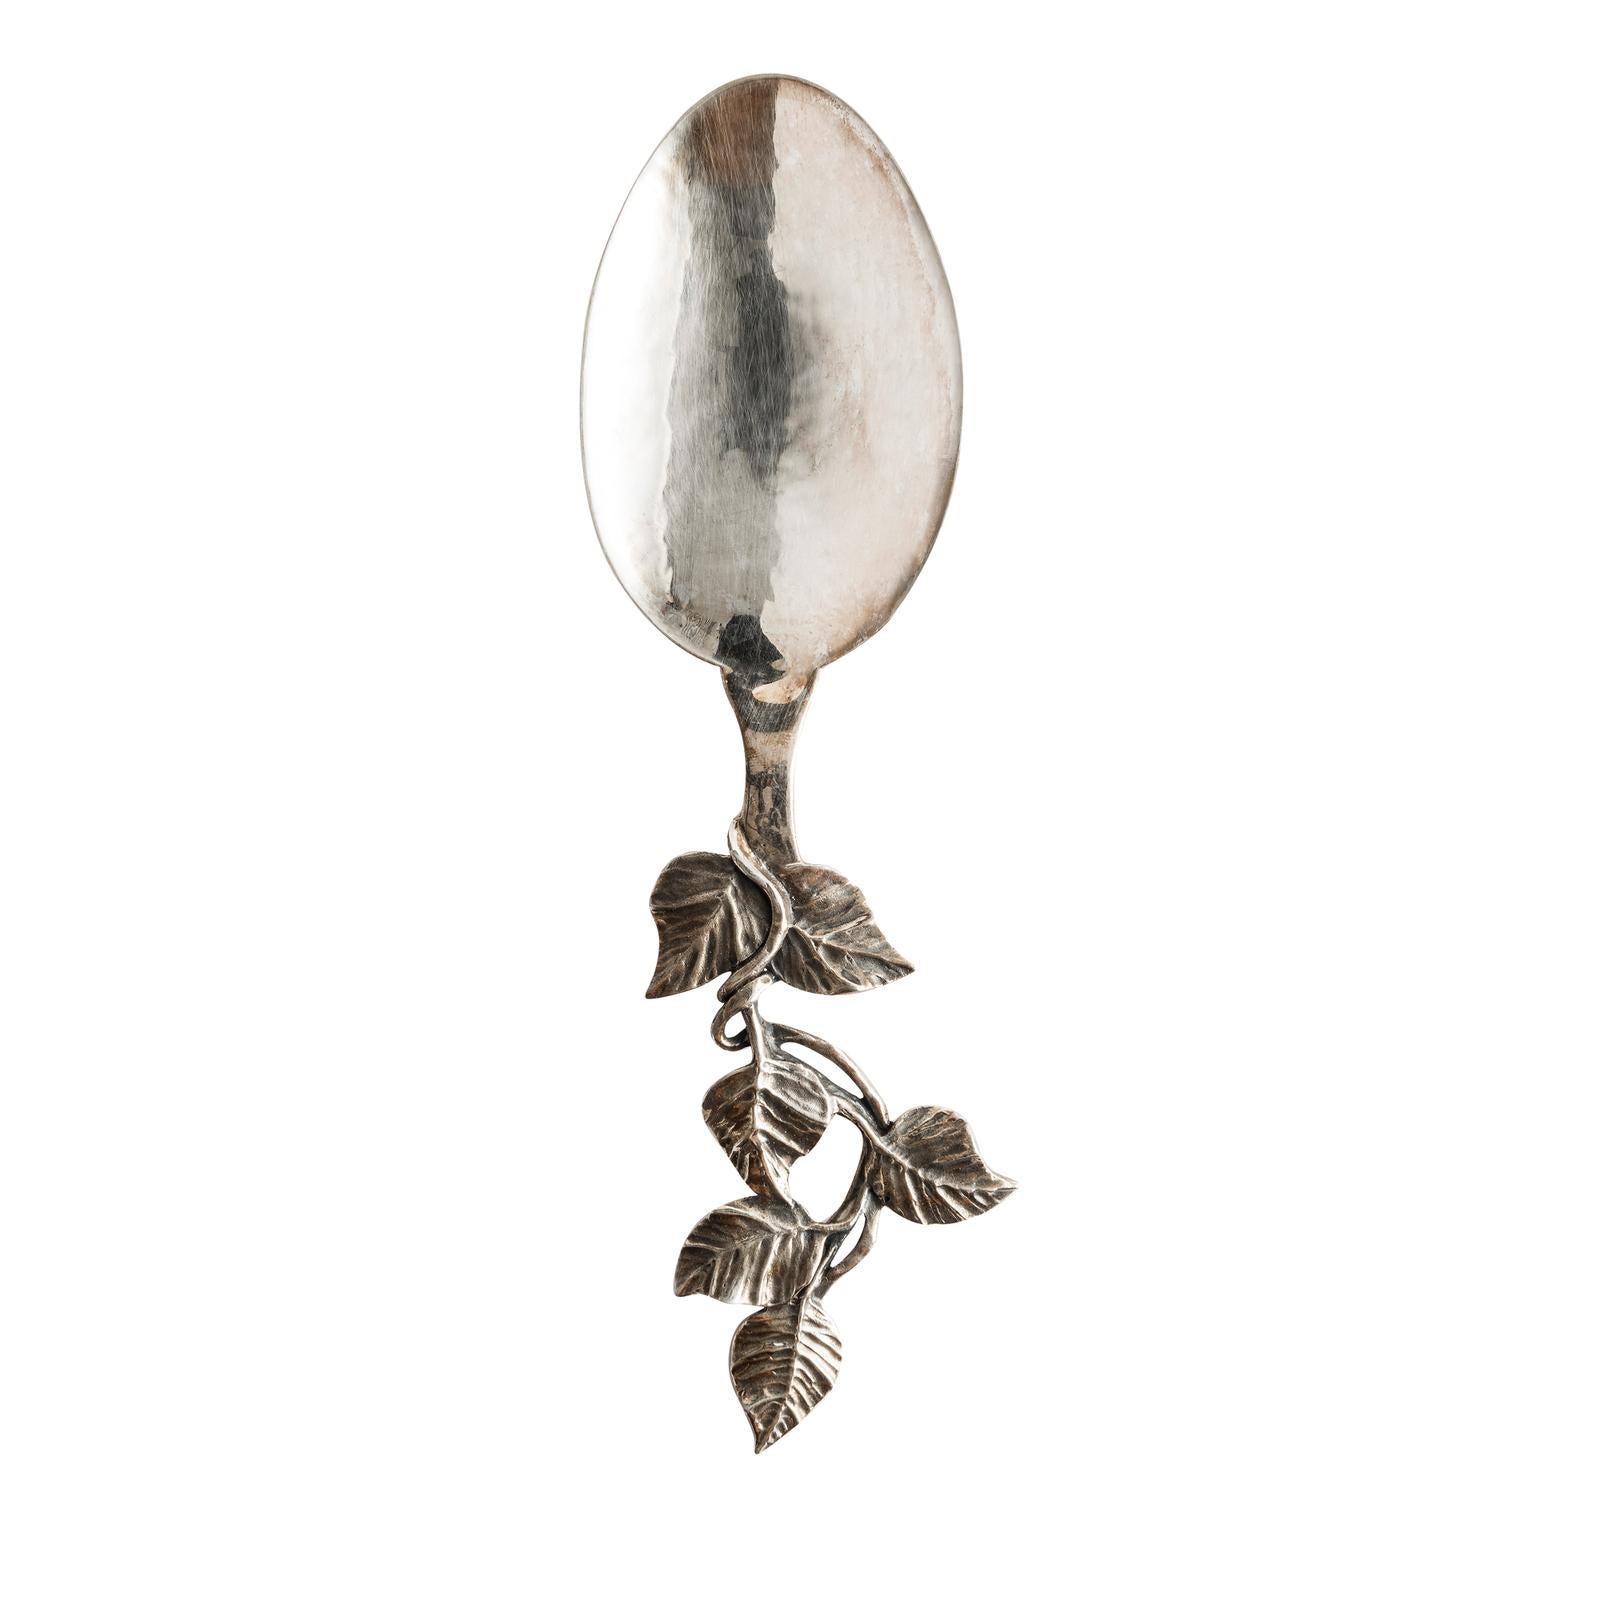 This exquisite sterling silver tablespoon was handmade by Osanna Visconti using the technique of lost-wax casting. The handle of this spoon is a veritable sculpture, featuring delightfully-crafted undulating leaves, contrasting in size with the